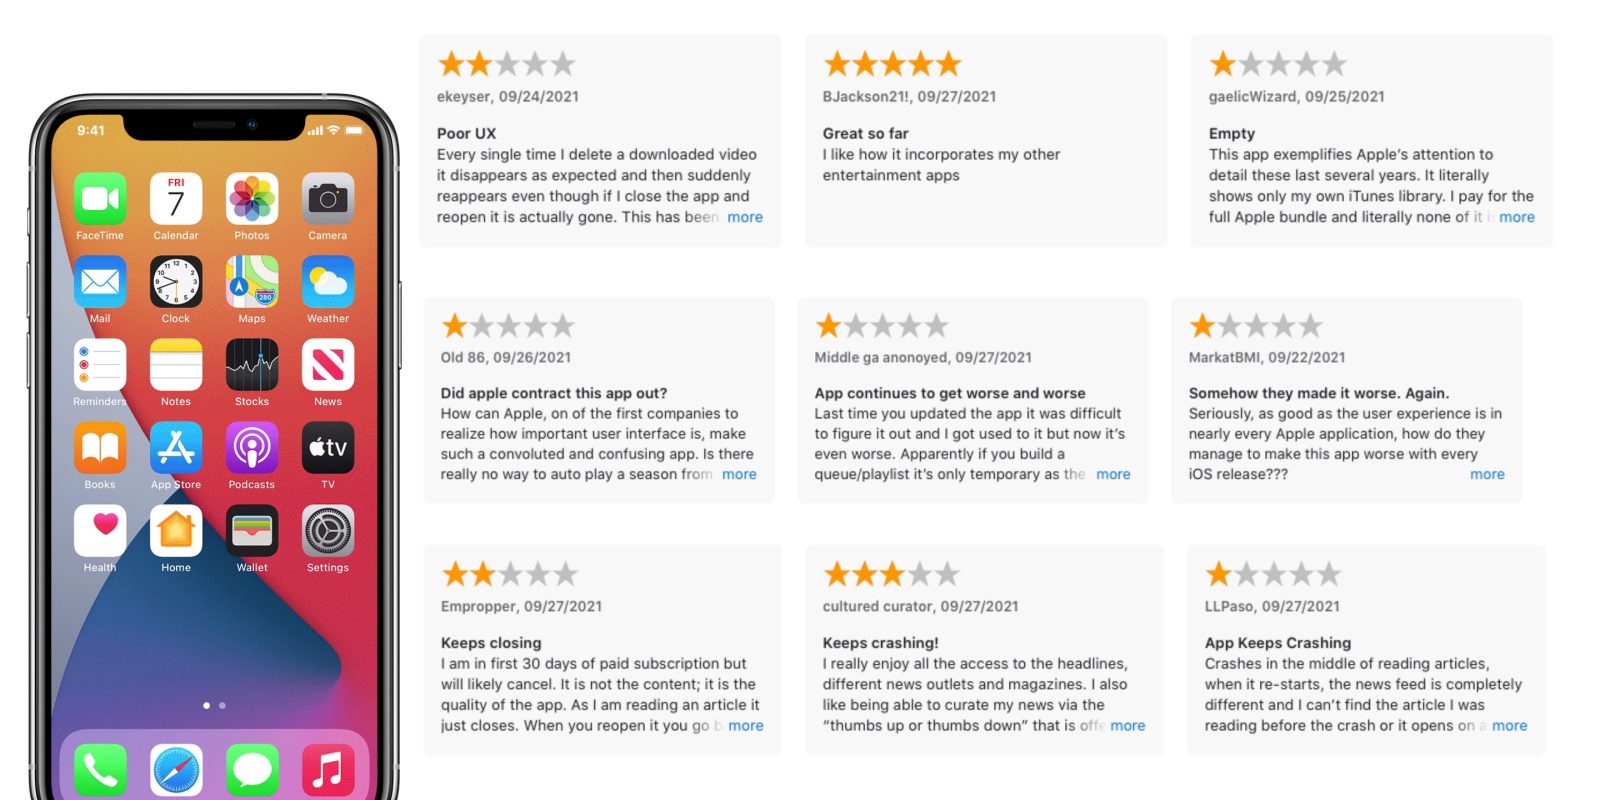 Apple now lets you share how much you love or hate built-in apps via App Store reviews